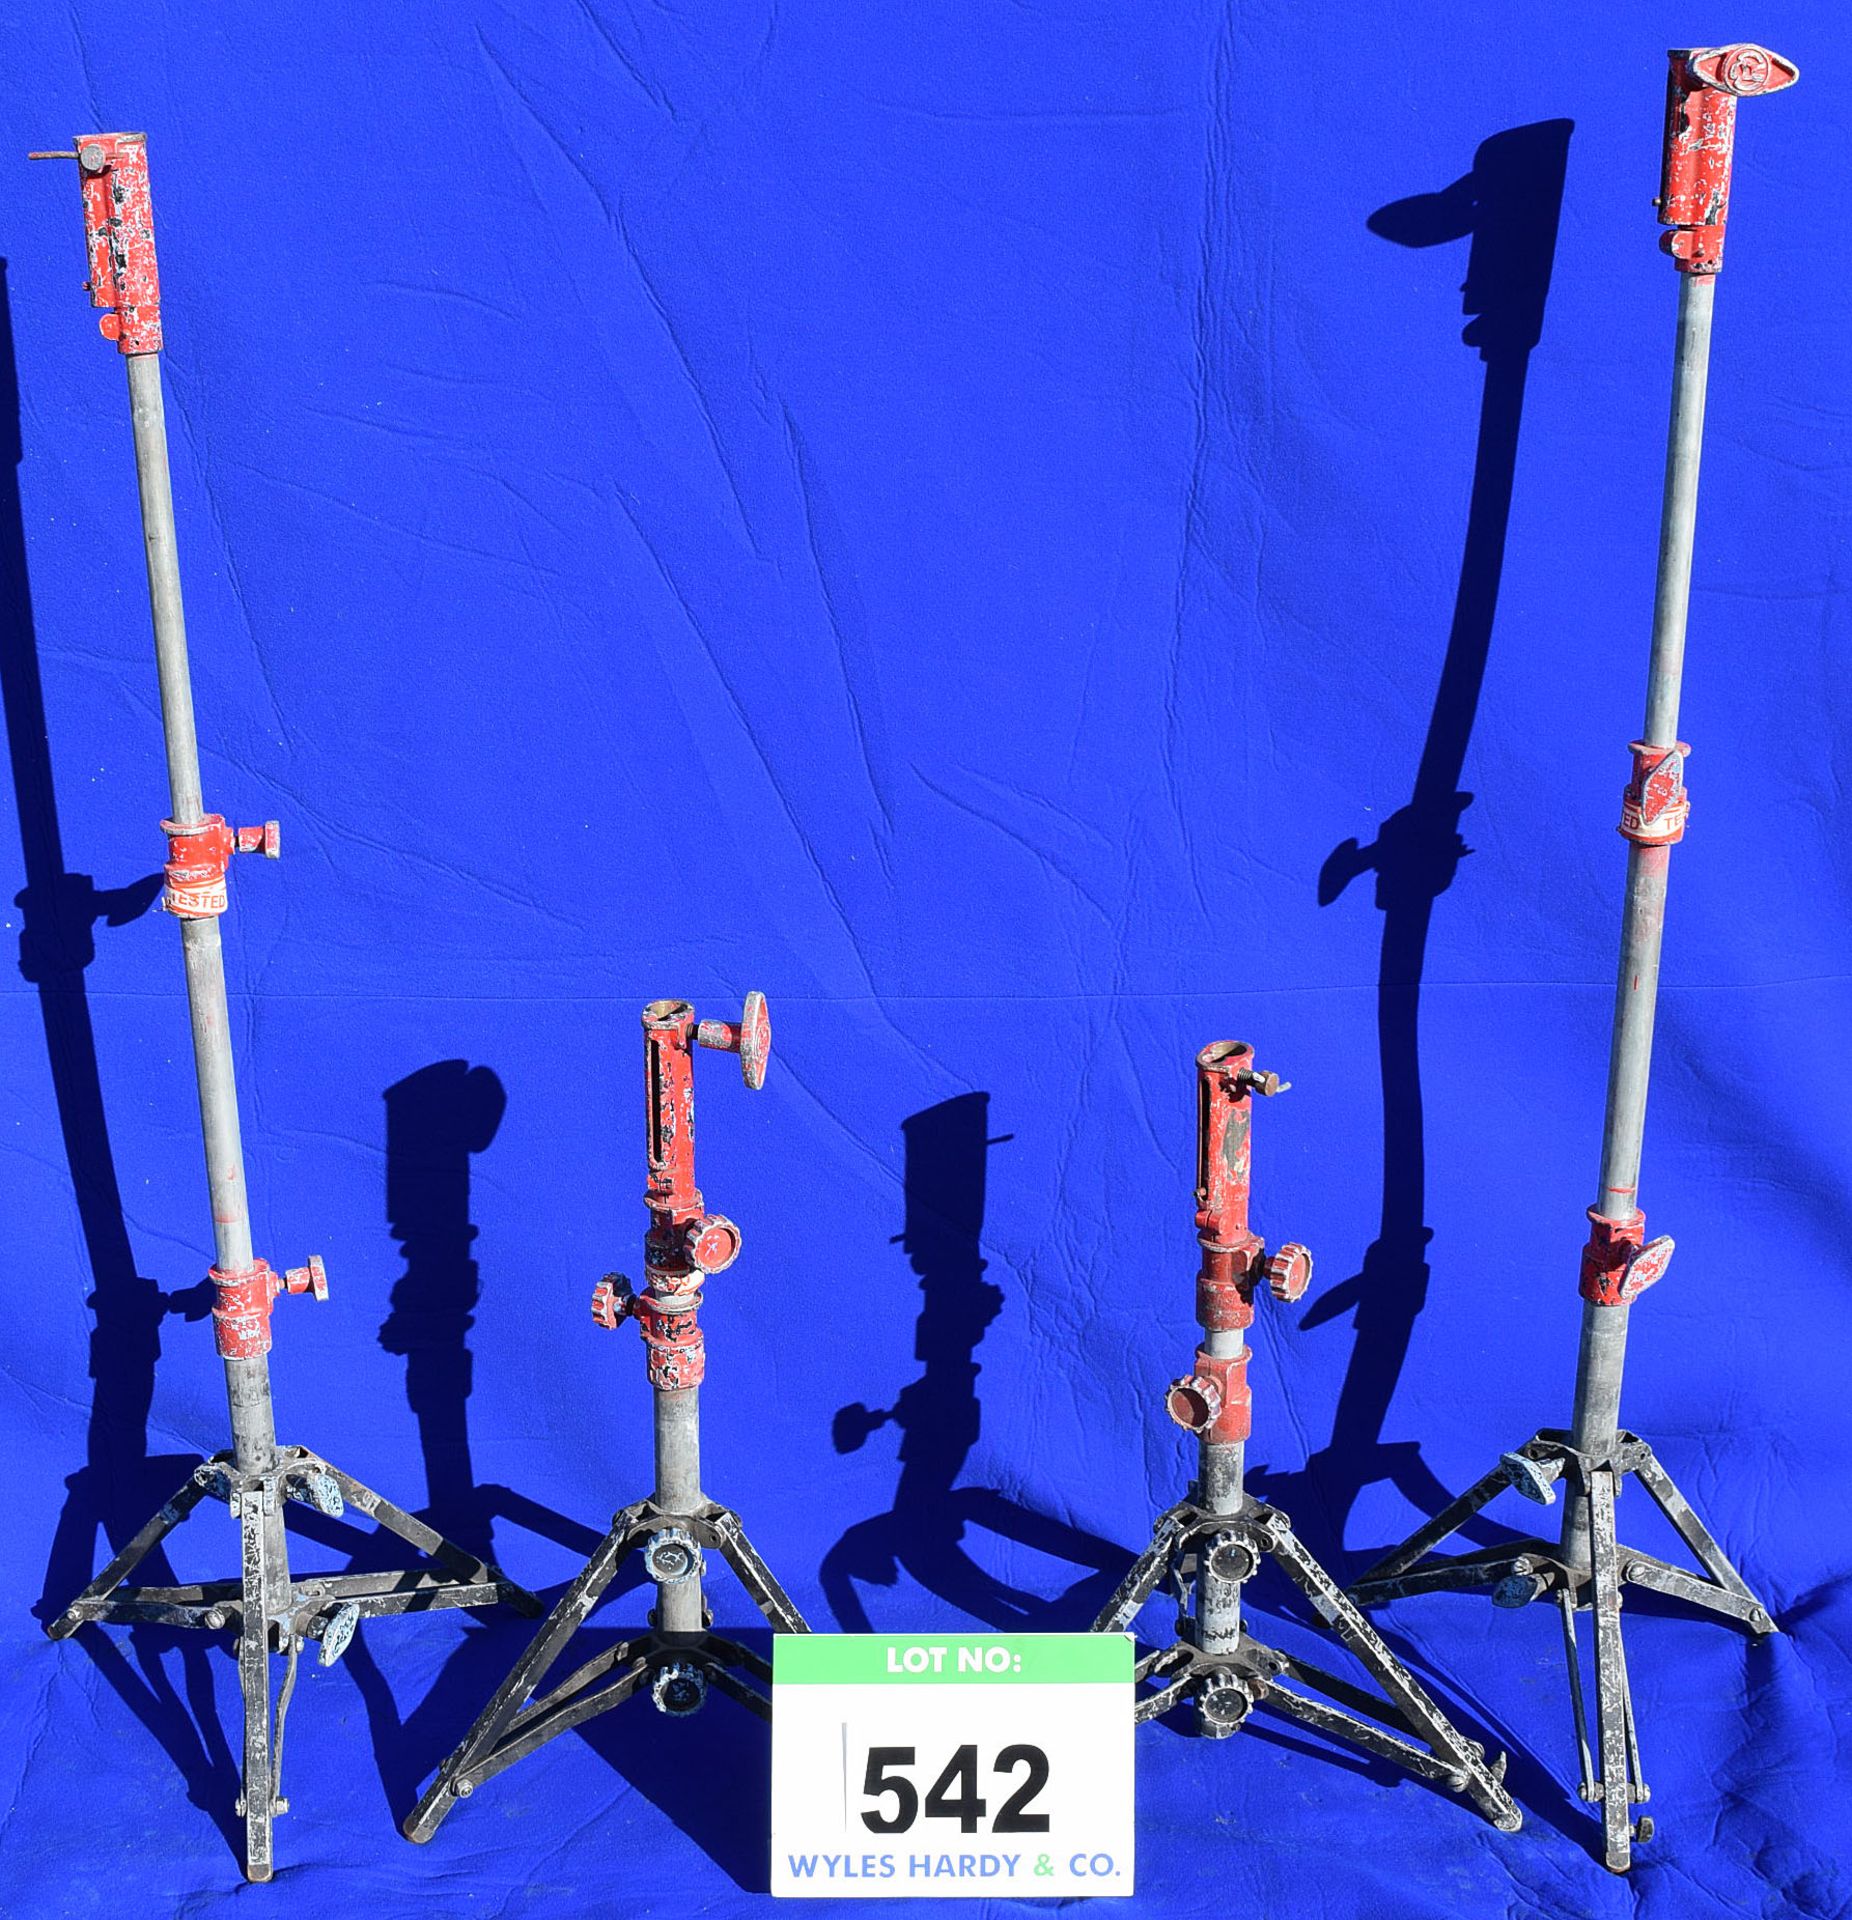 Four Steel 2-Stage 1.3M Telescopic Folding Stands